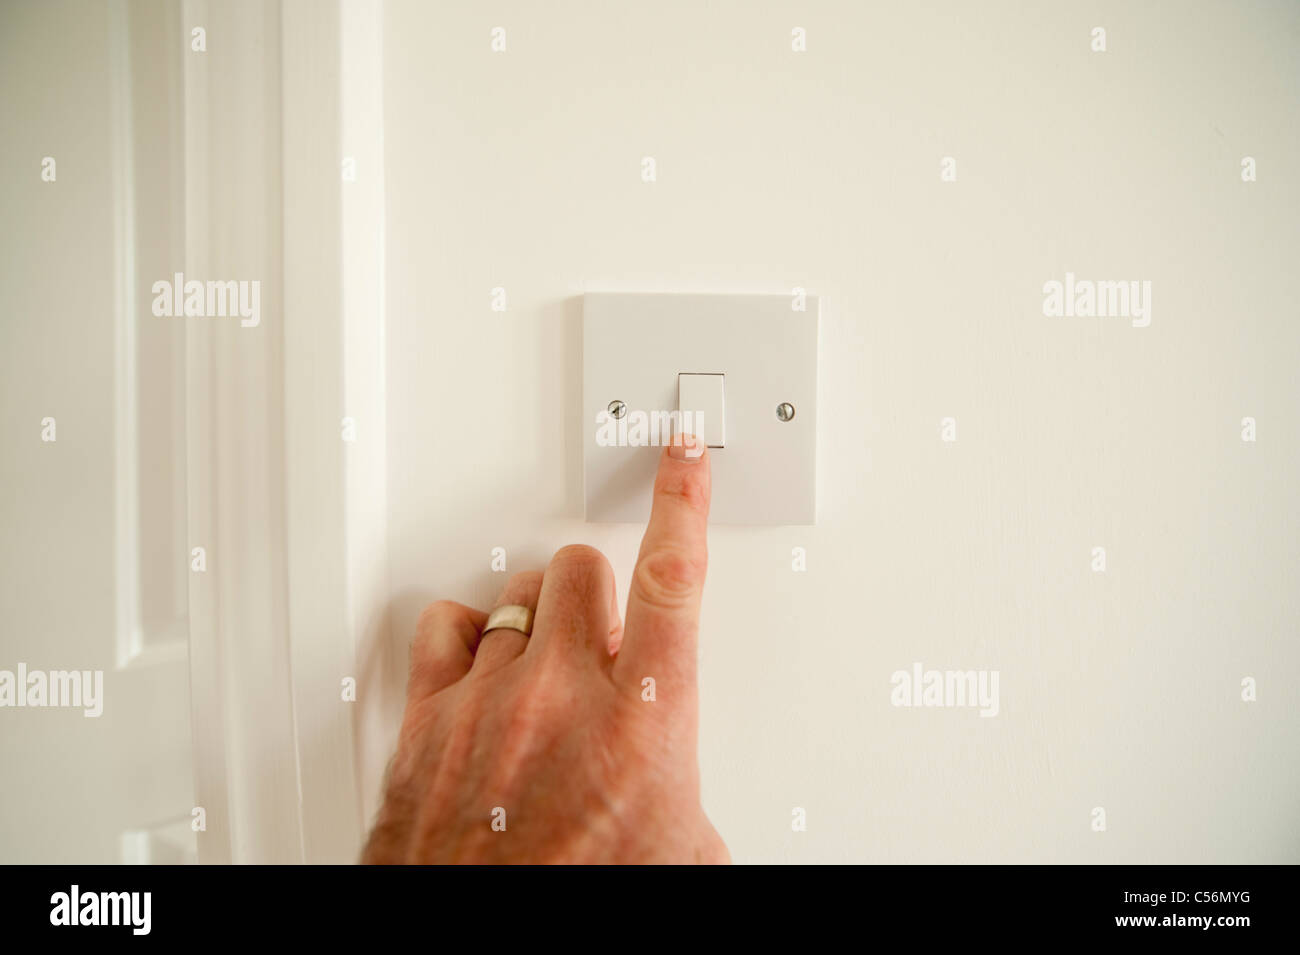 Hand turning on a light switch Stock Photo